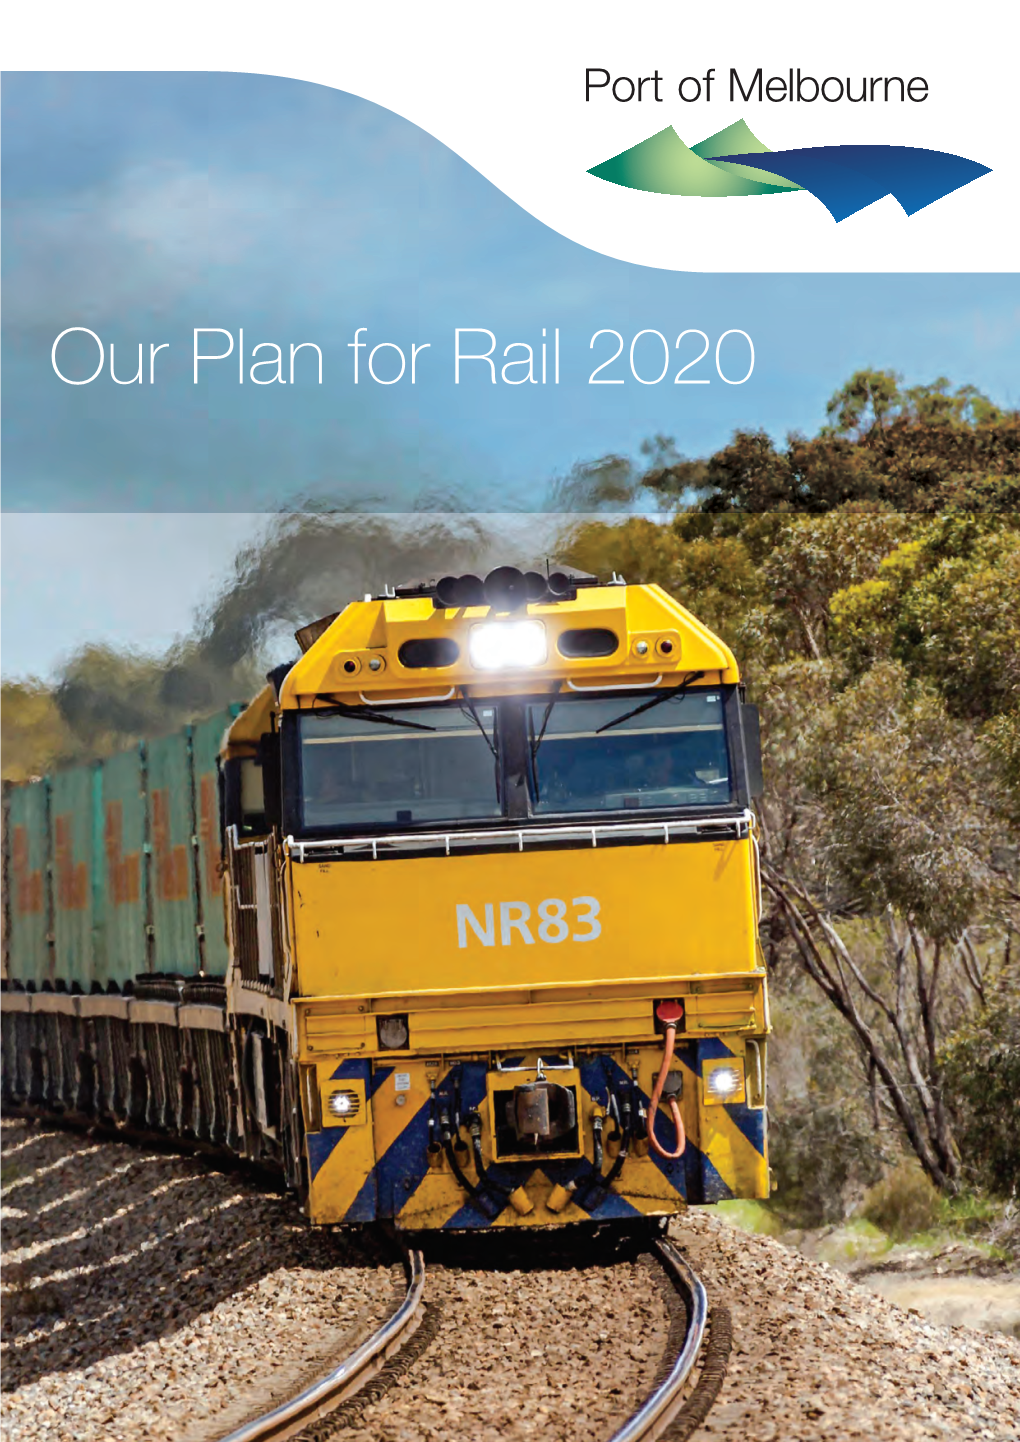 Our Plan for Rail 2020